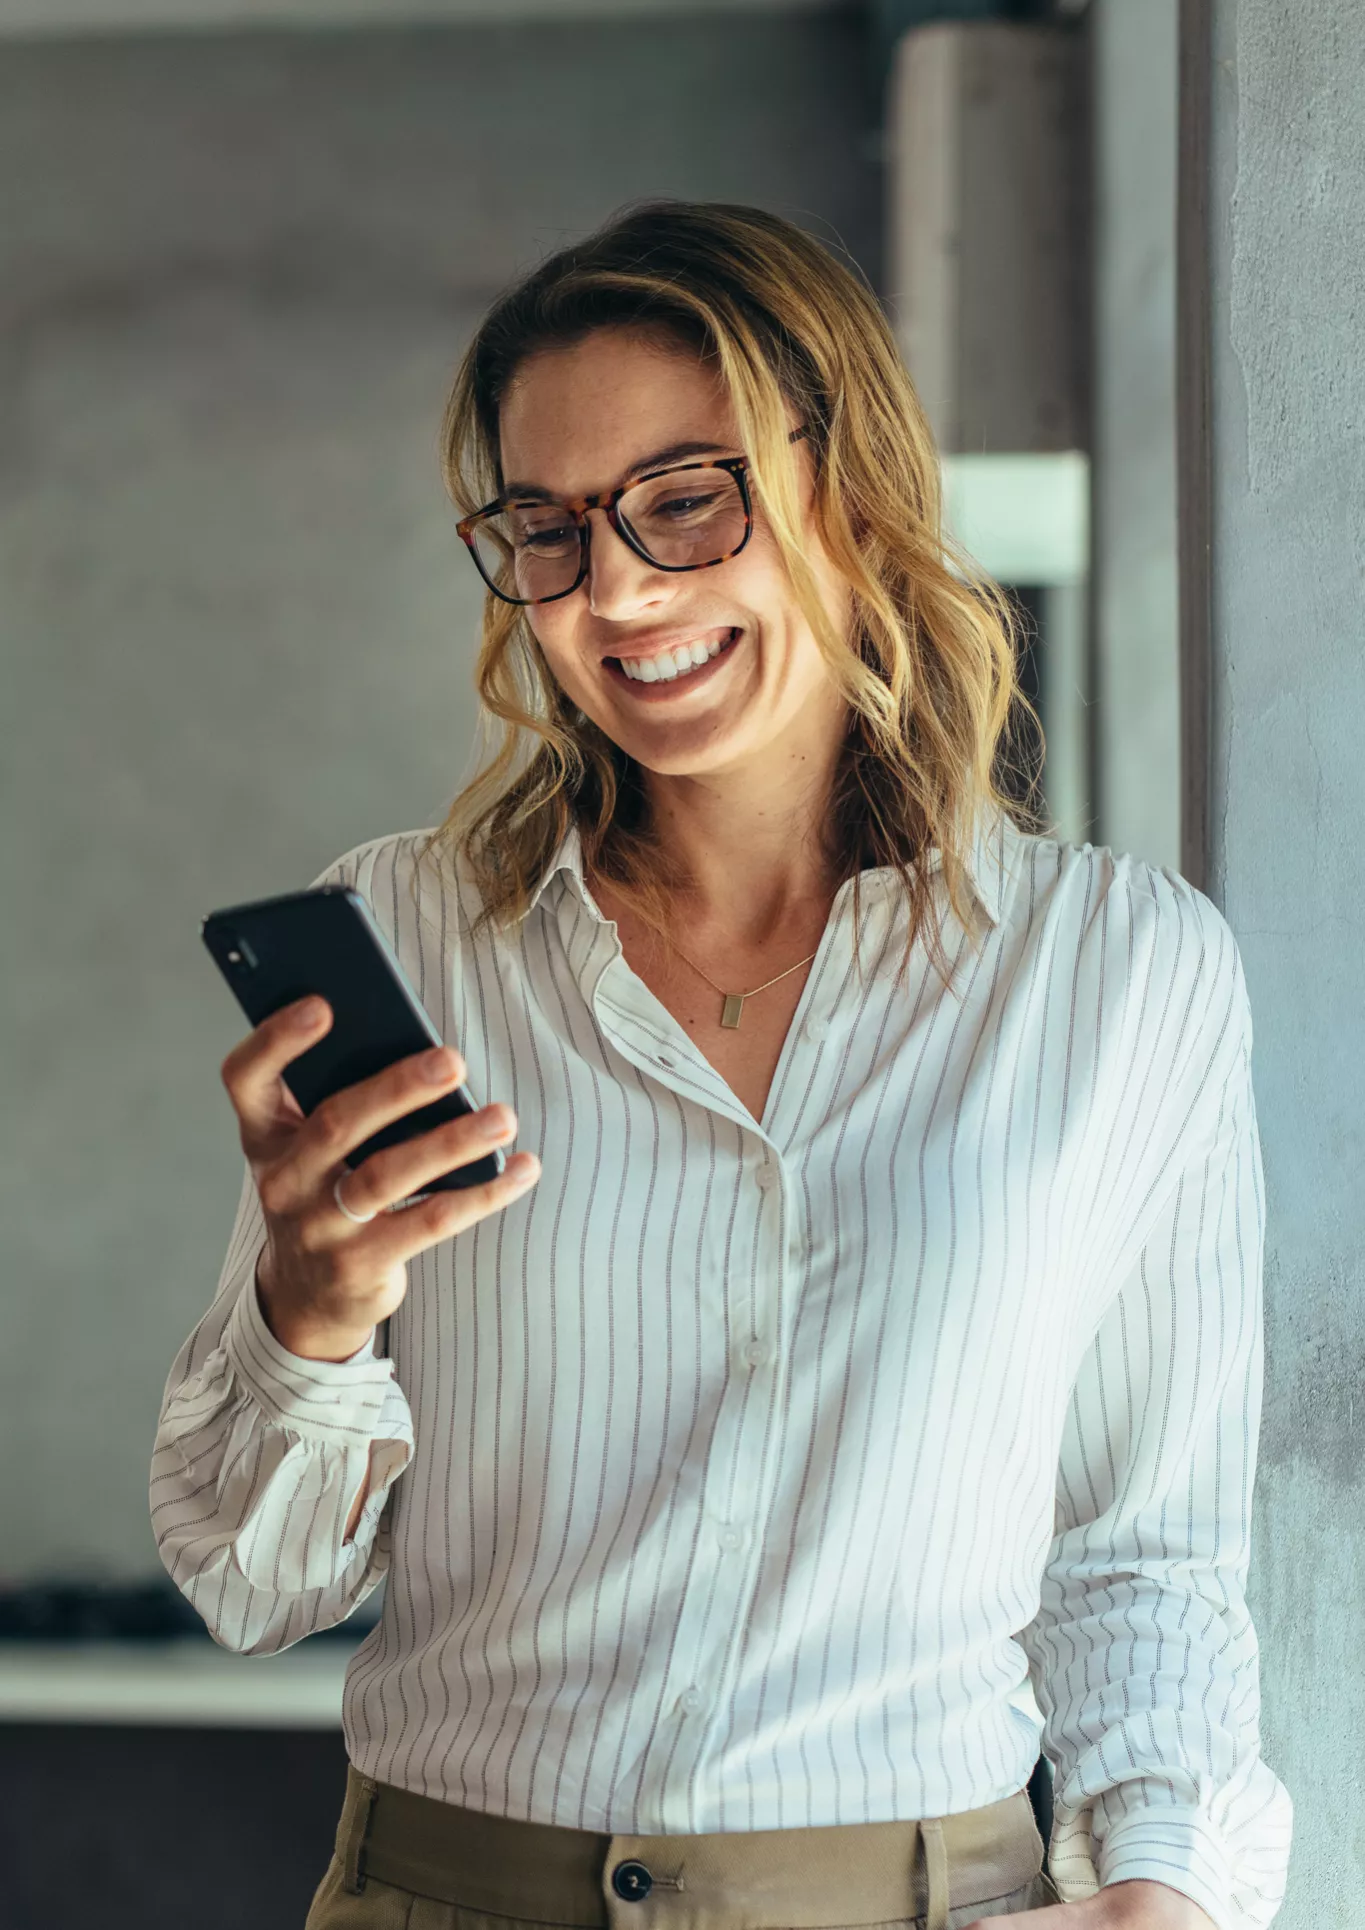 A woman with glasses smiling at her mobile phone